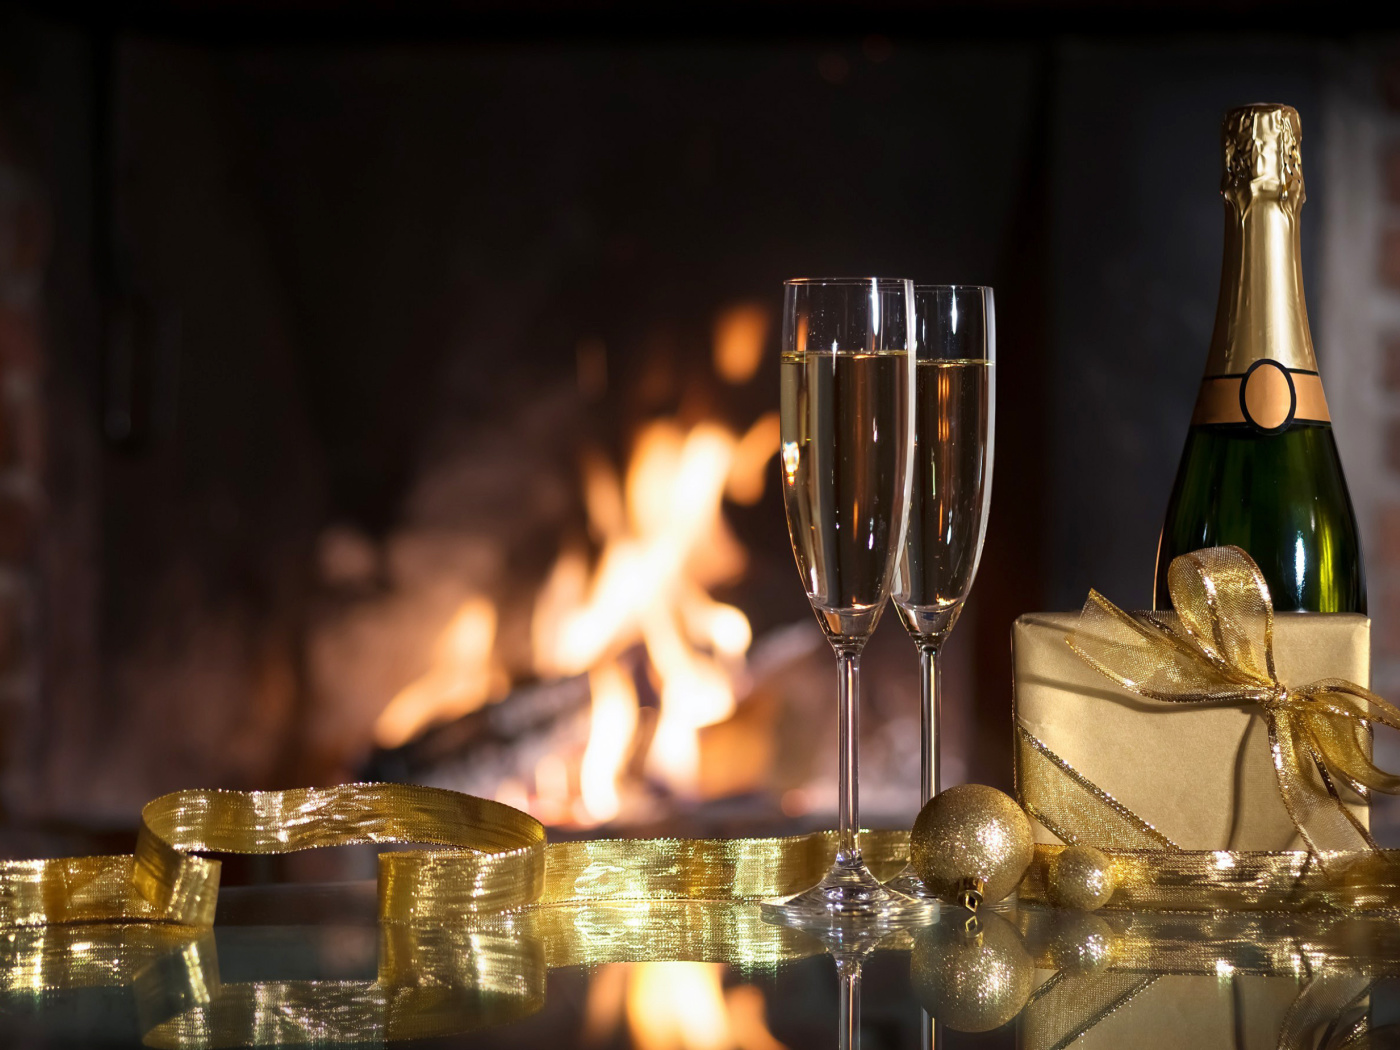 Das Champagne and Fireplace Wallpaper 1400x1050